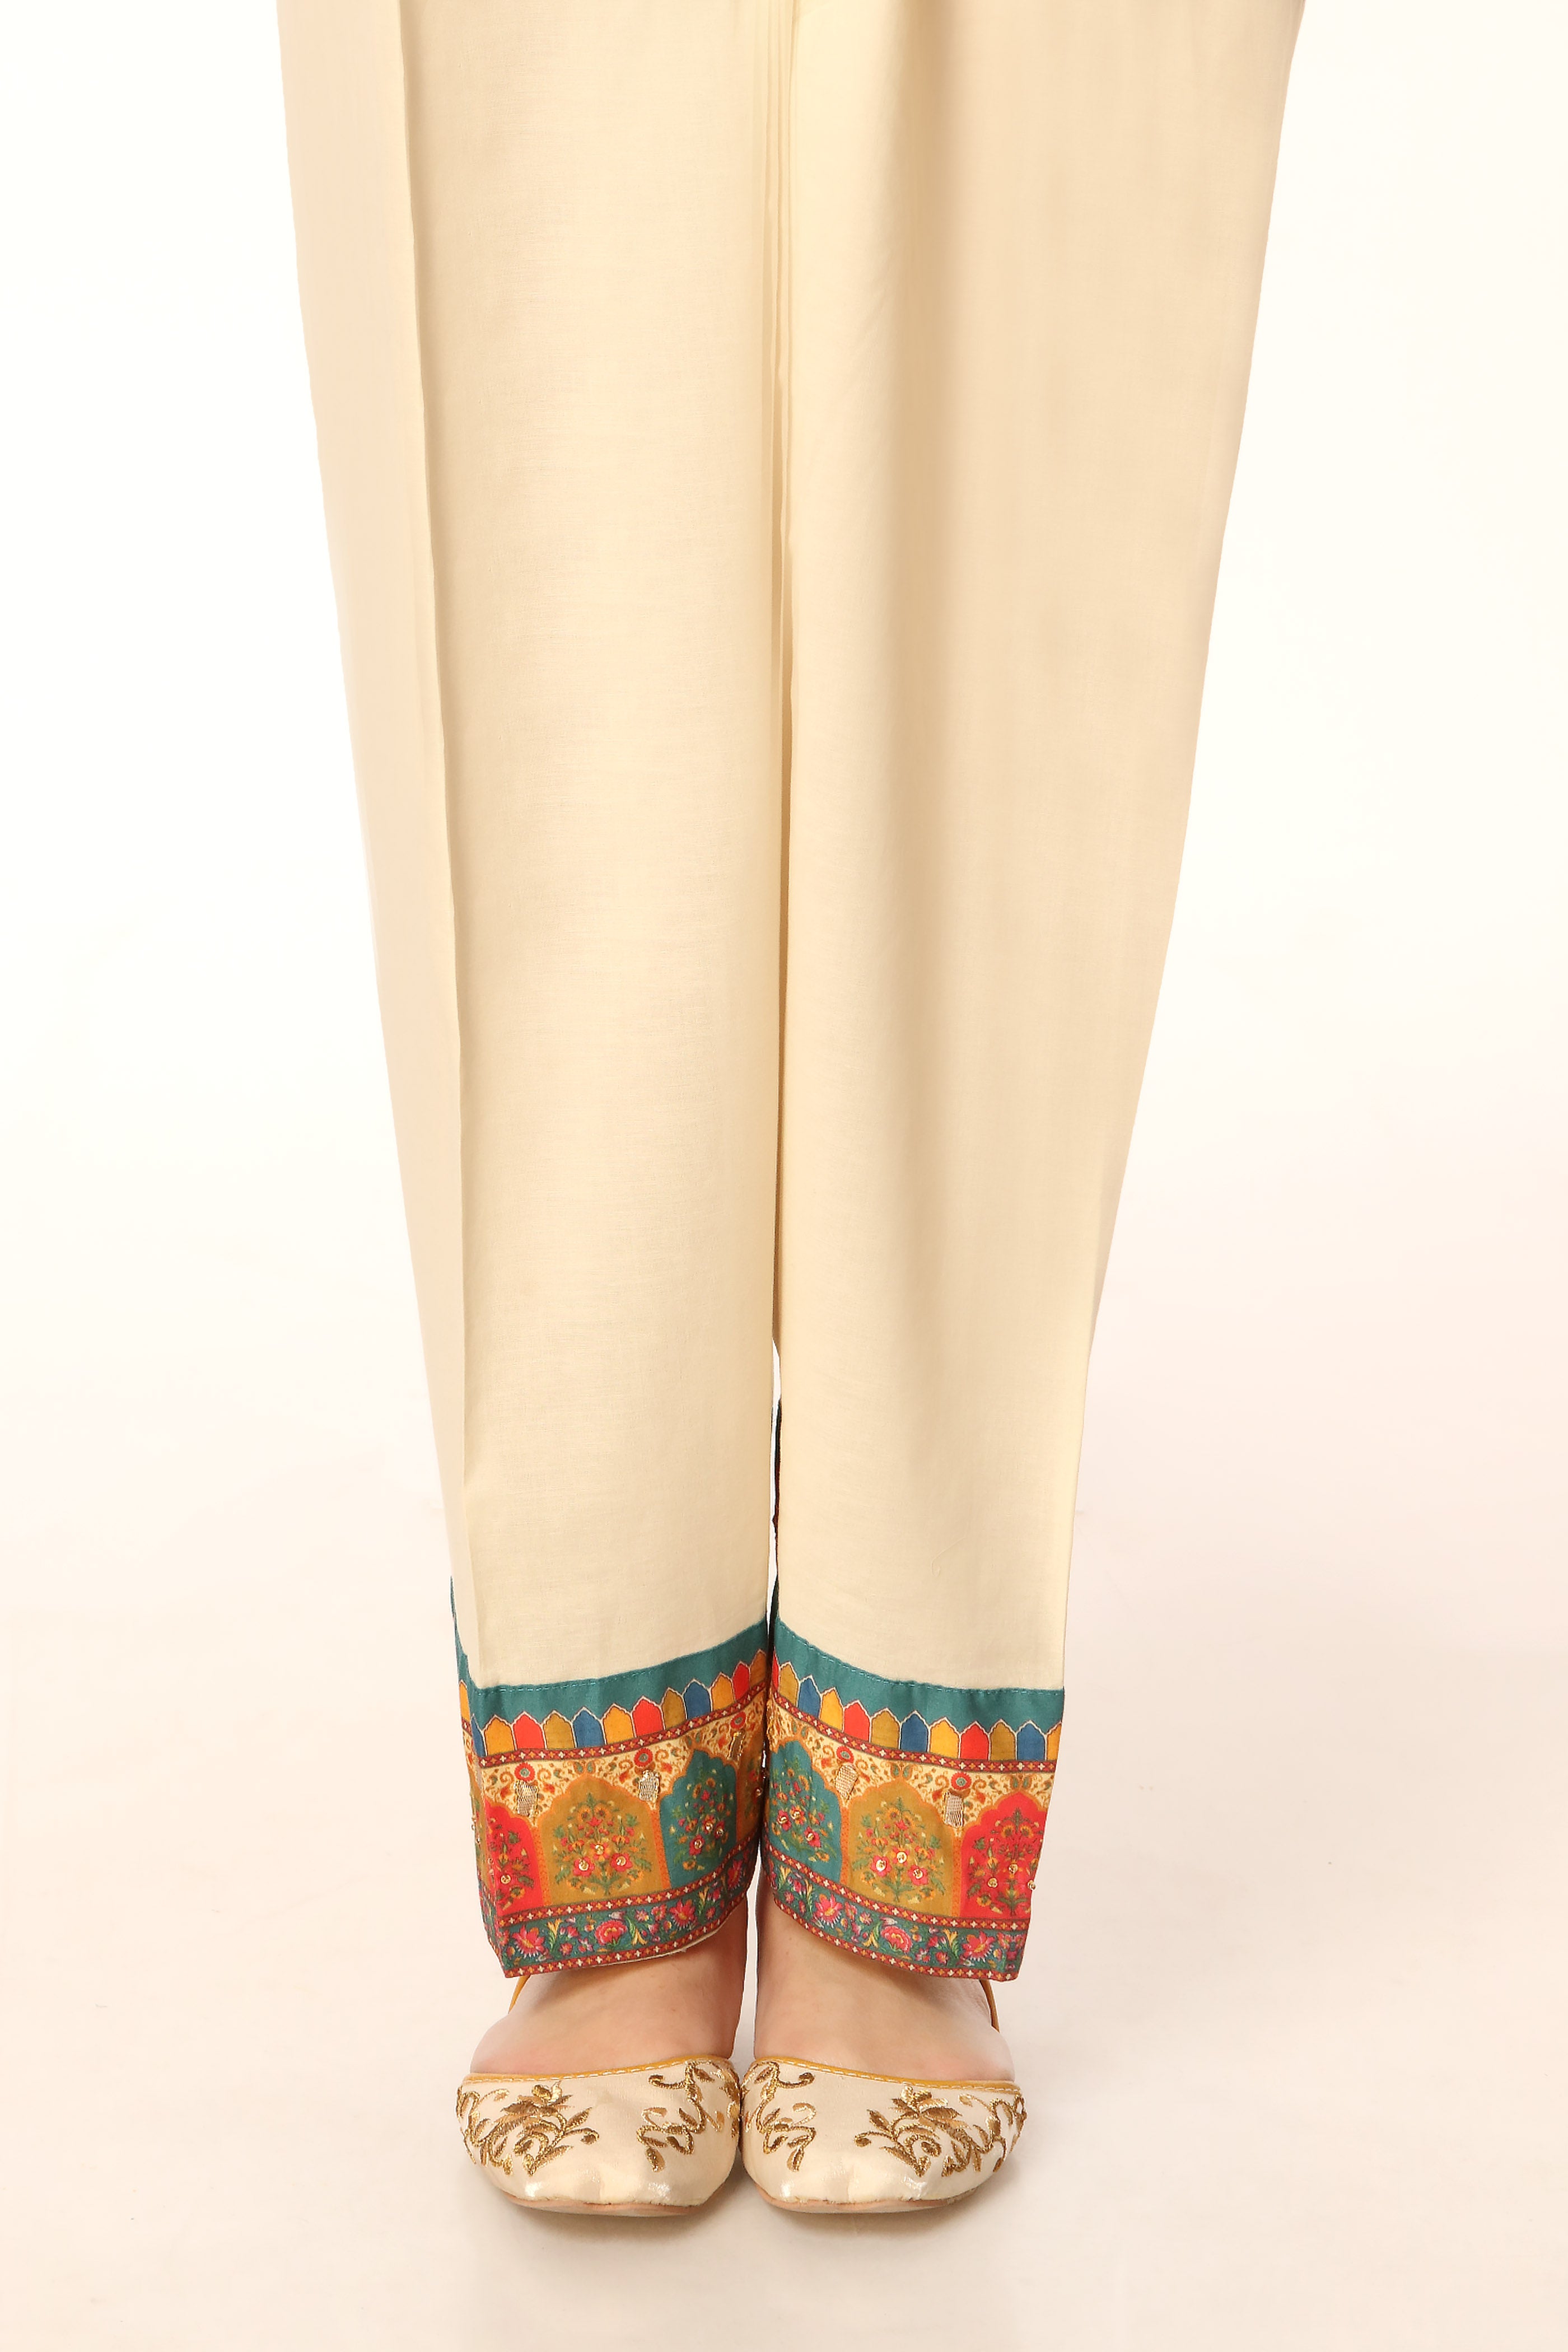 Mughal Bottom in Off White coloured Printed Lawn fabric